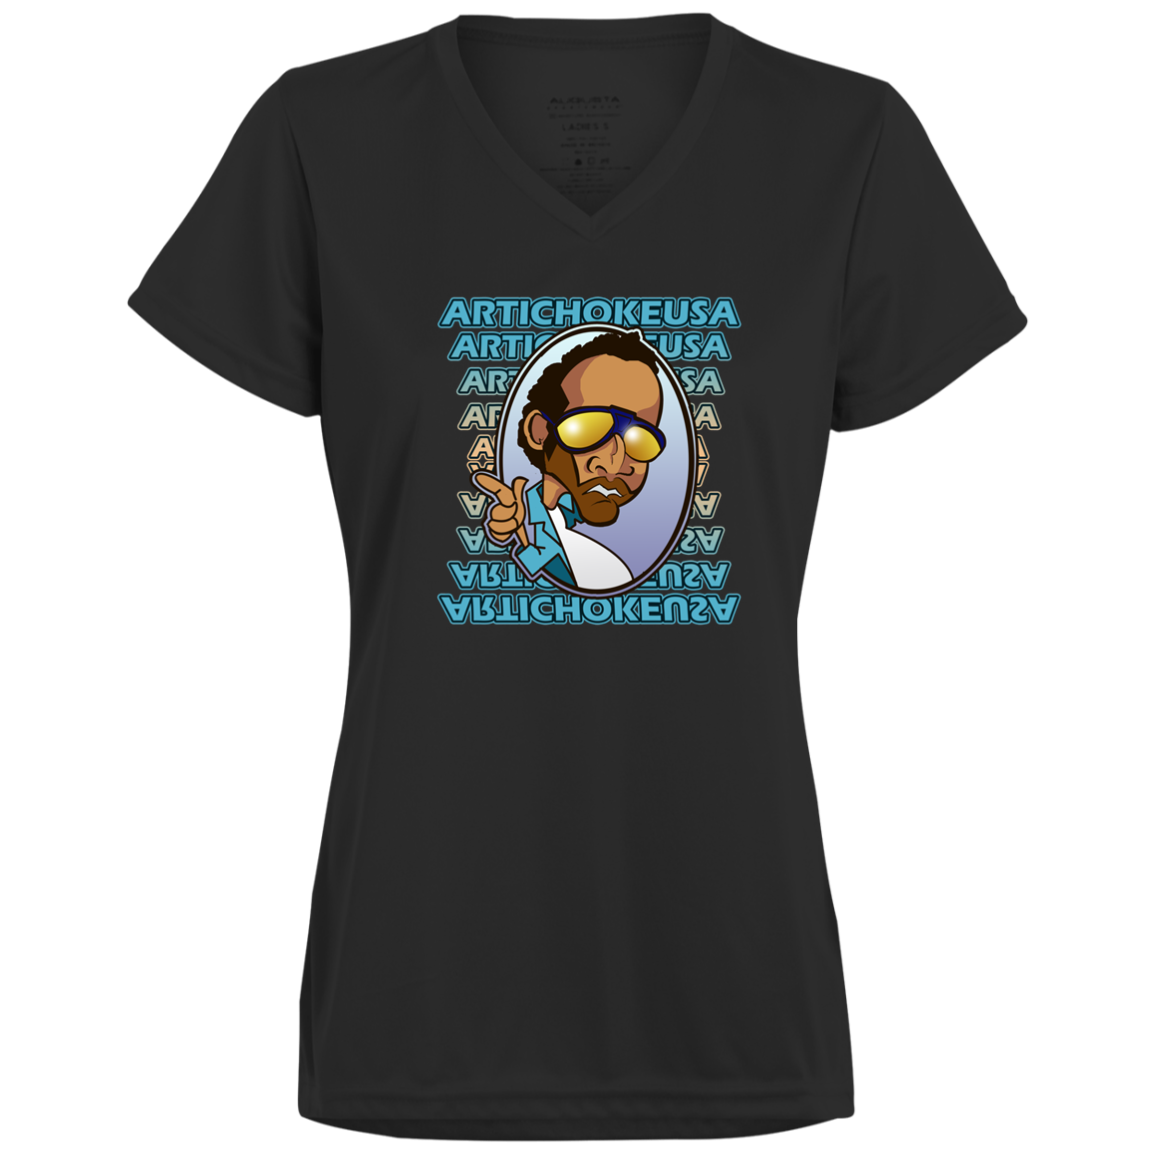 ArtichokeUSA Character and Font design. Let's Create Your Own Team Design Today. My first client Charles. Ladies’ Moisture-Wicking V-Neck Tee